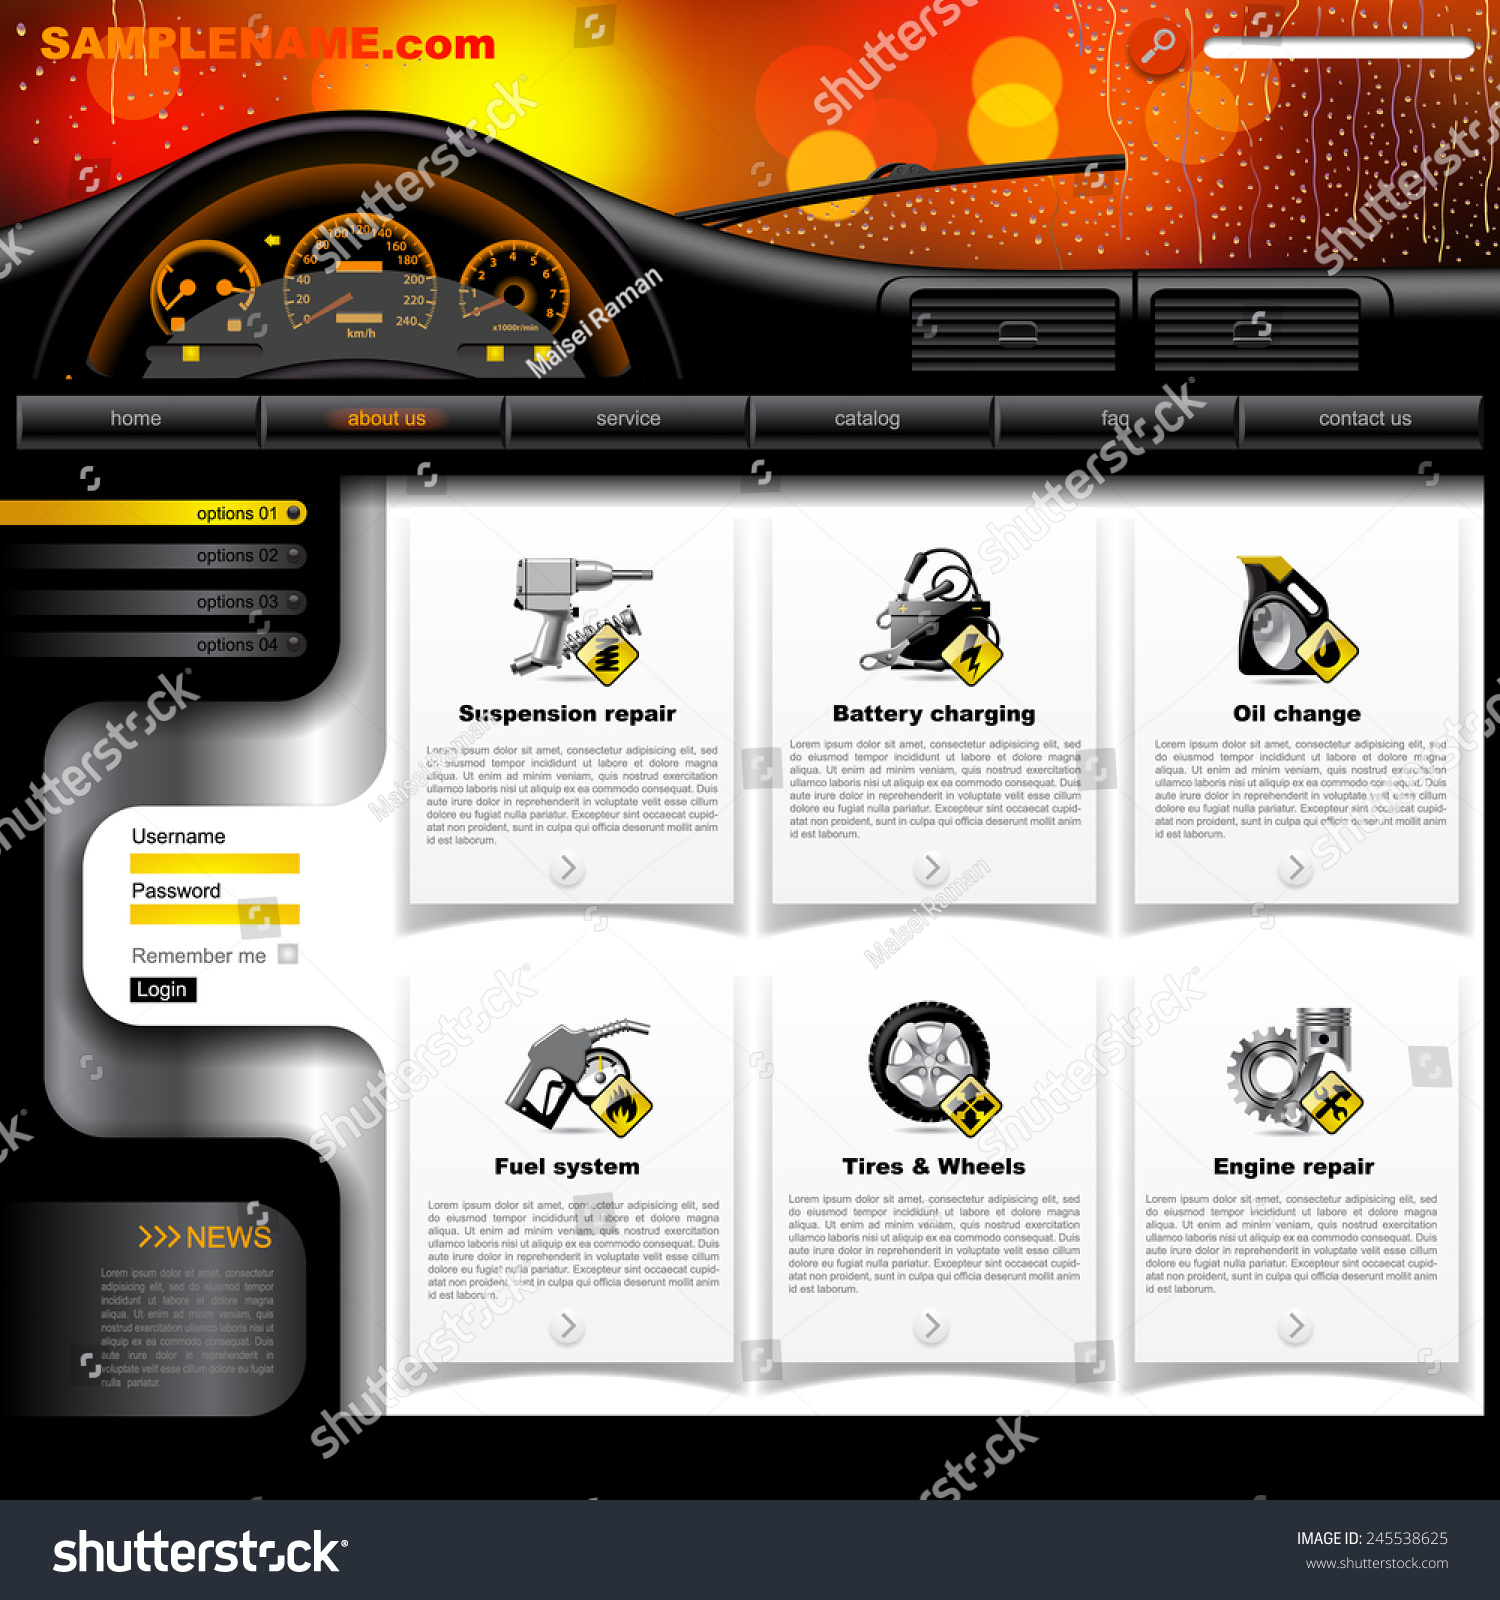 SVG of Automobile Service Website design template with dashboard, windshield in rain and service and repair related icons. Vector illustration svg